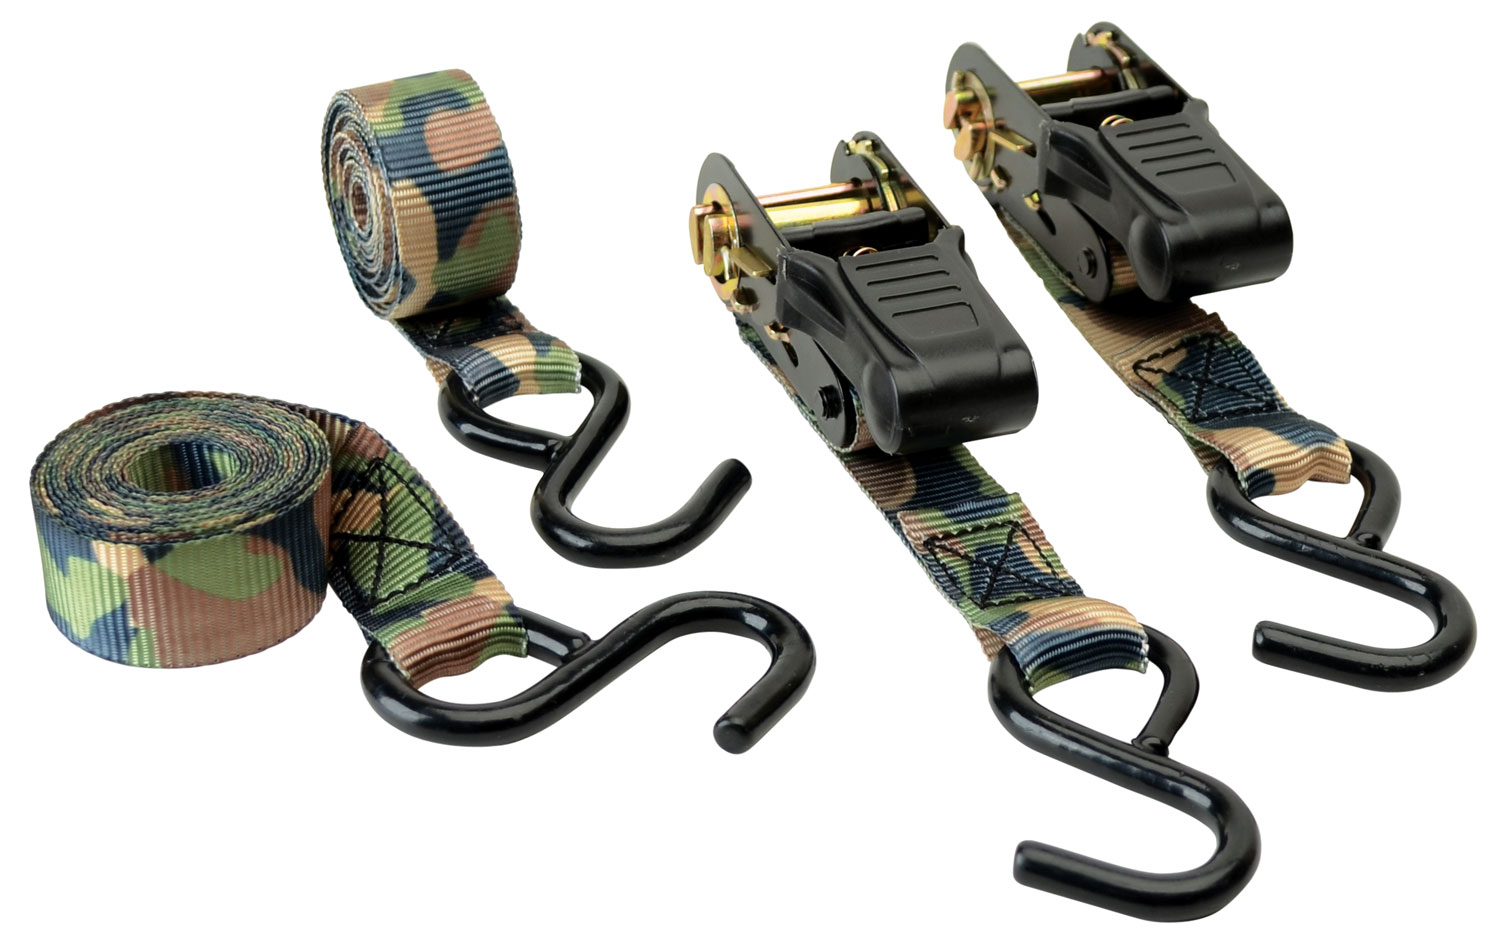 HME RS4PK Camouflage Ratchet Tie Down Straps Camouflage 4 Pack